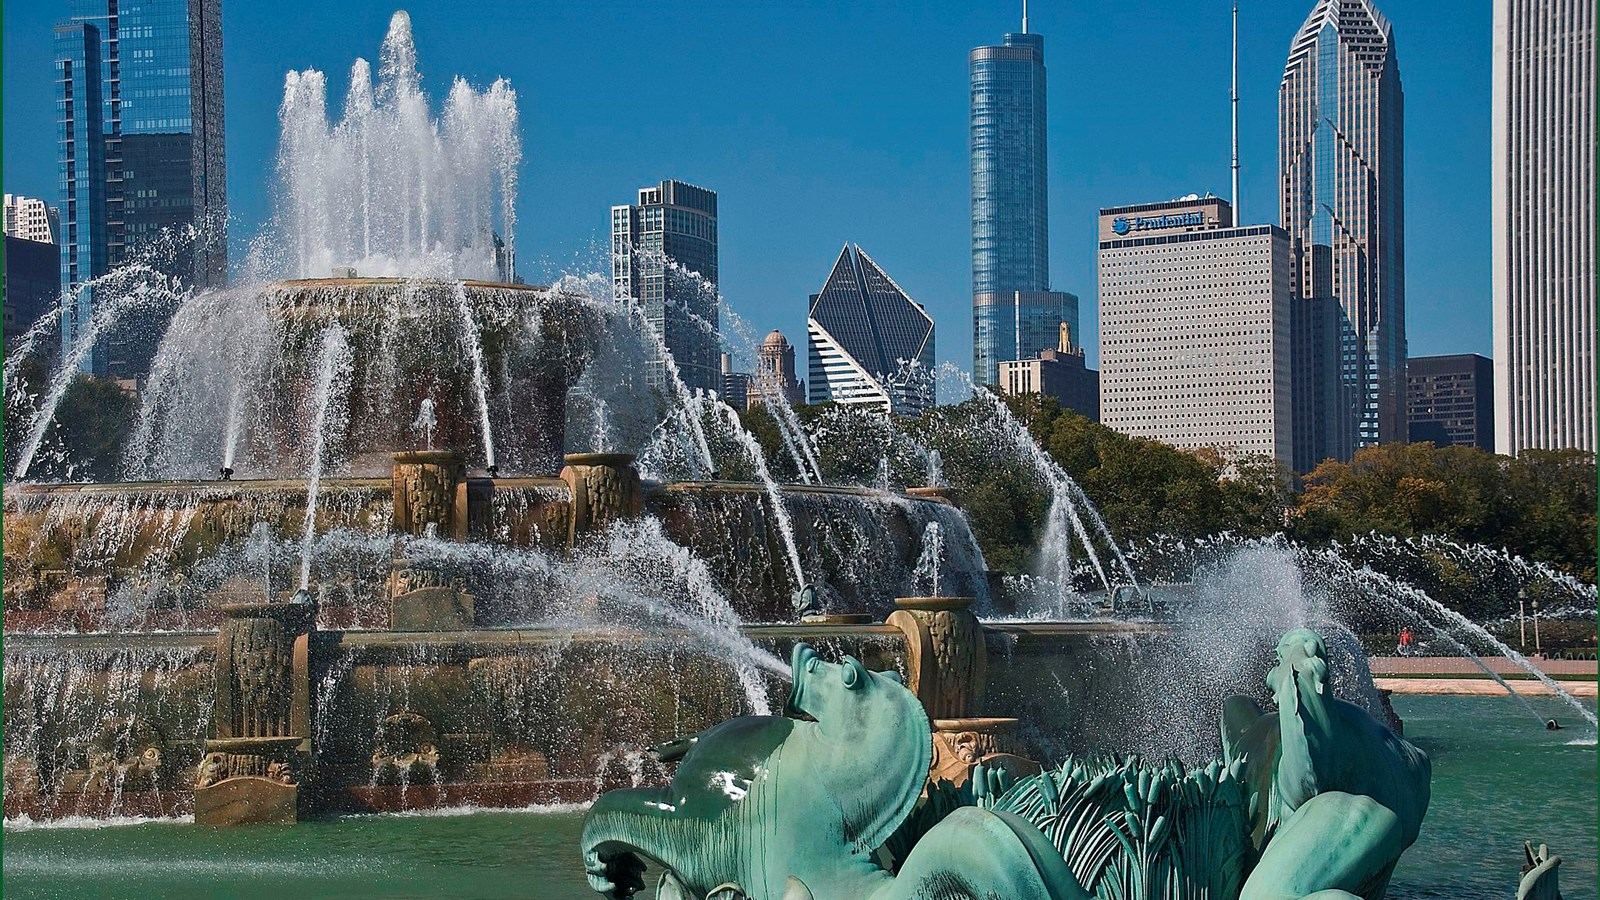 A large water fountain with a green sculpture in front and tall buildings and blue sky behind.